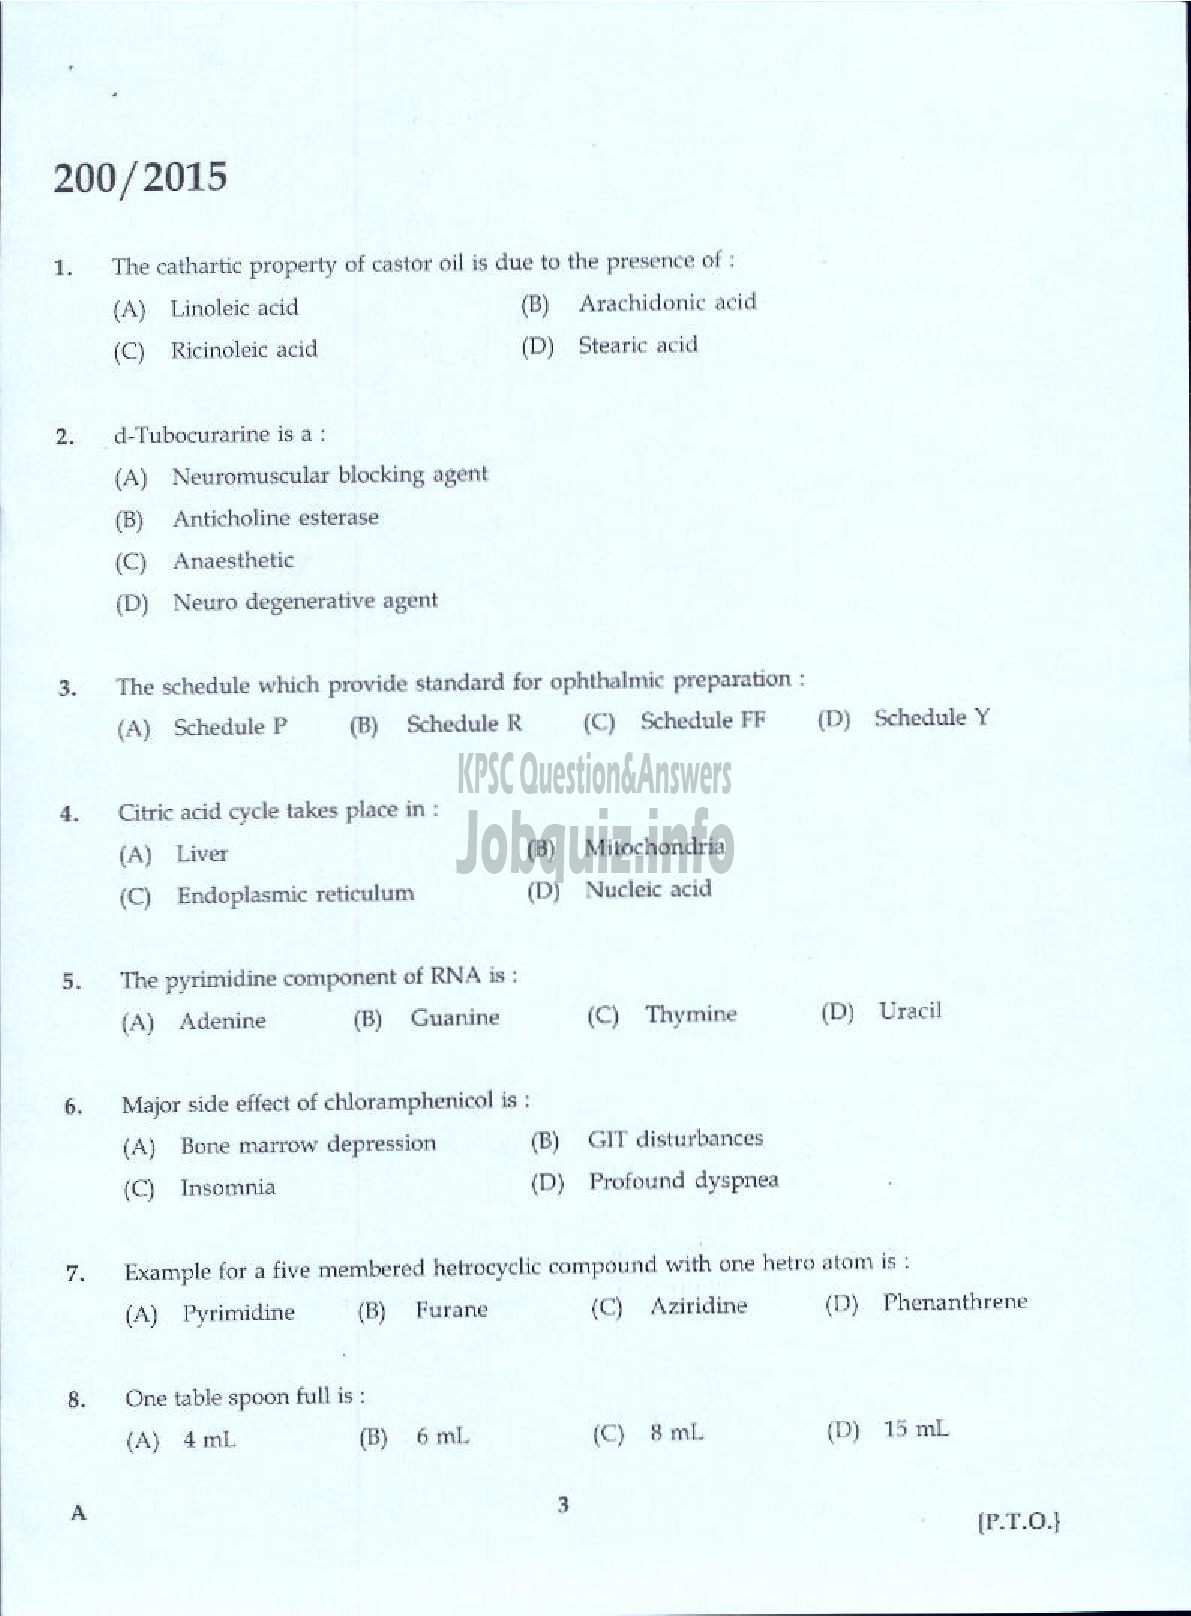 Kerala PSC Question Paper - PHARMACIST GR II HEALTH SERVICES-1